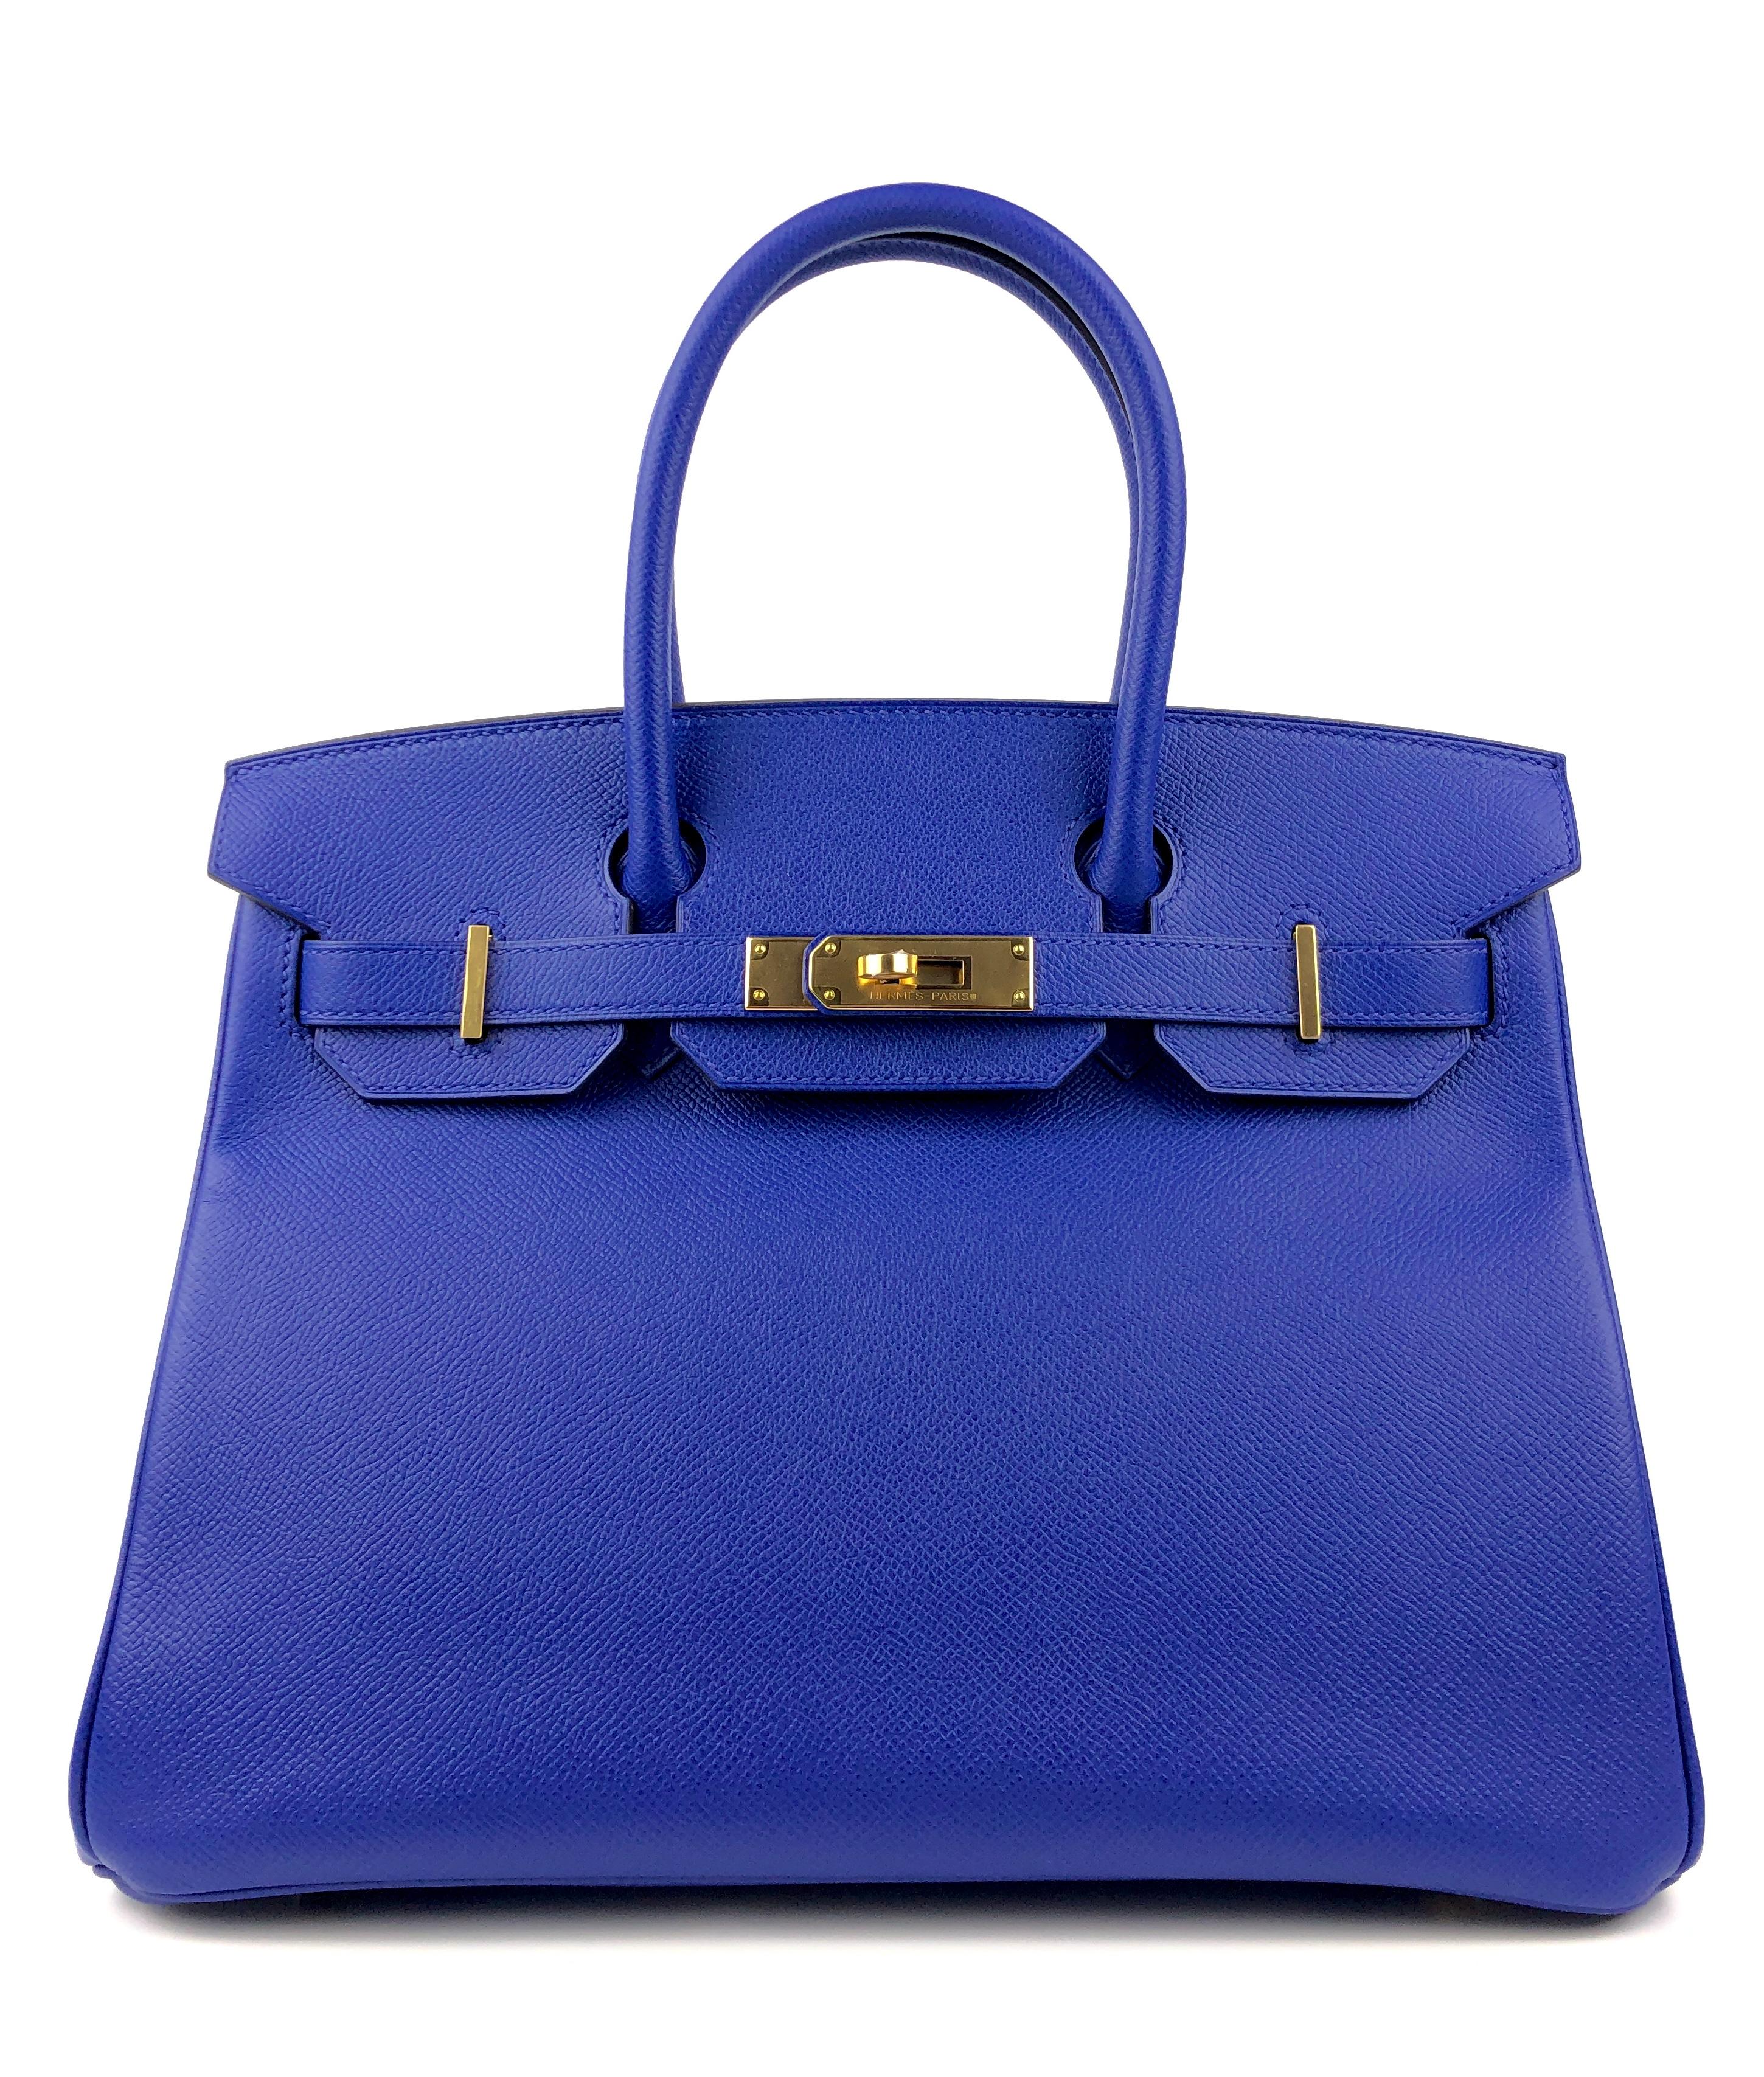 Stunning Hermes Birkin 30 Blue ElectricEpsom Gold Hardware.  As New Condition, Plastic on Hardware and Feet, Excellent corners and Structure. R Stamp 2014.

Shop with Confidence from Lux Addicts. Authenticity Guaranteed!